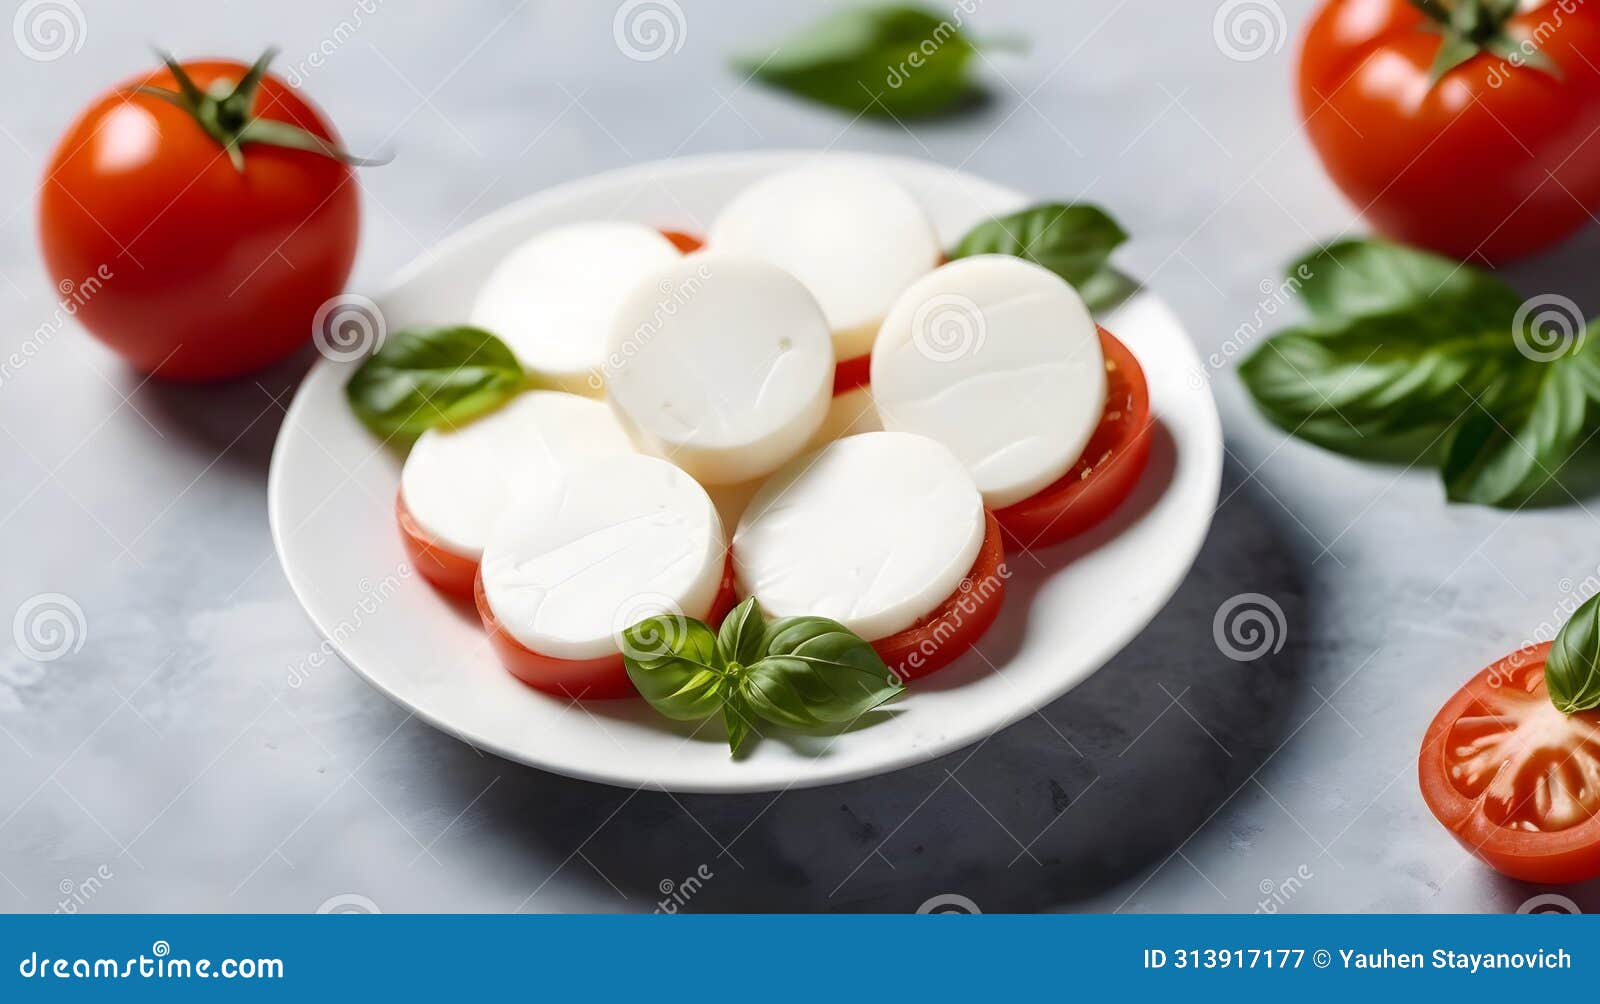 mozzarella typical italian product derived from milk